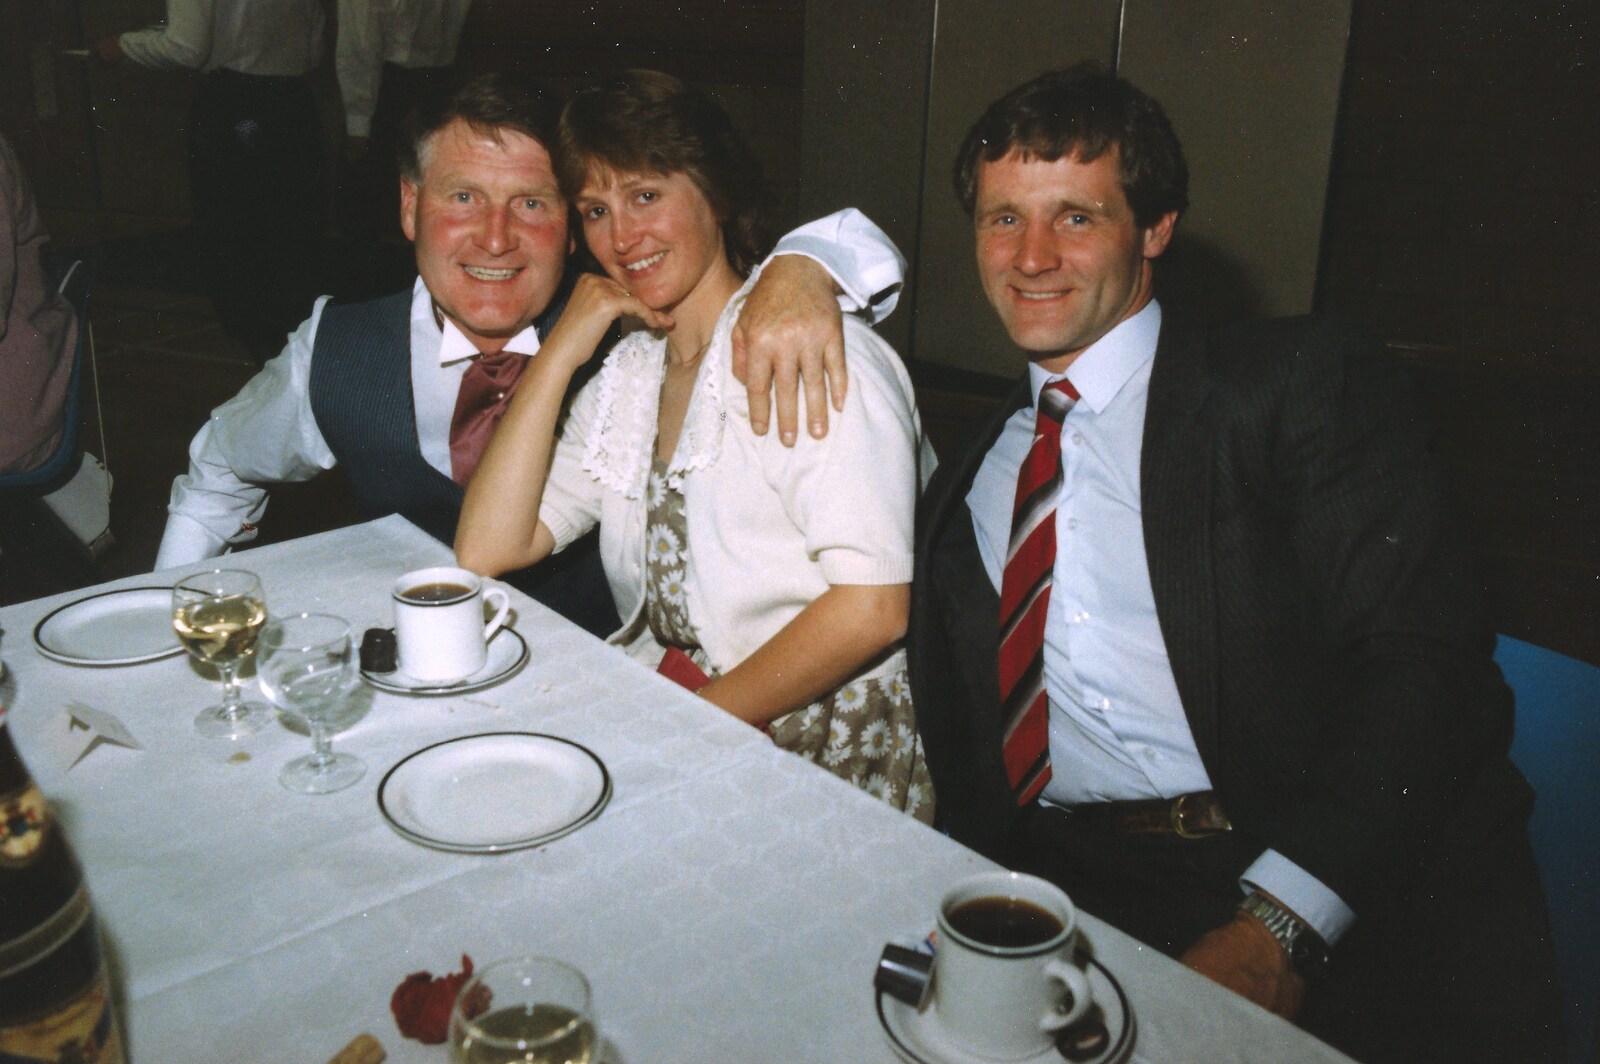 Bernie with his mate Russell and wife from Debbie's Wedding, Suffolk - 12th June 1999